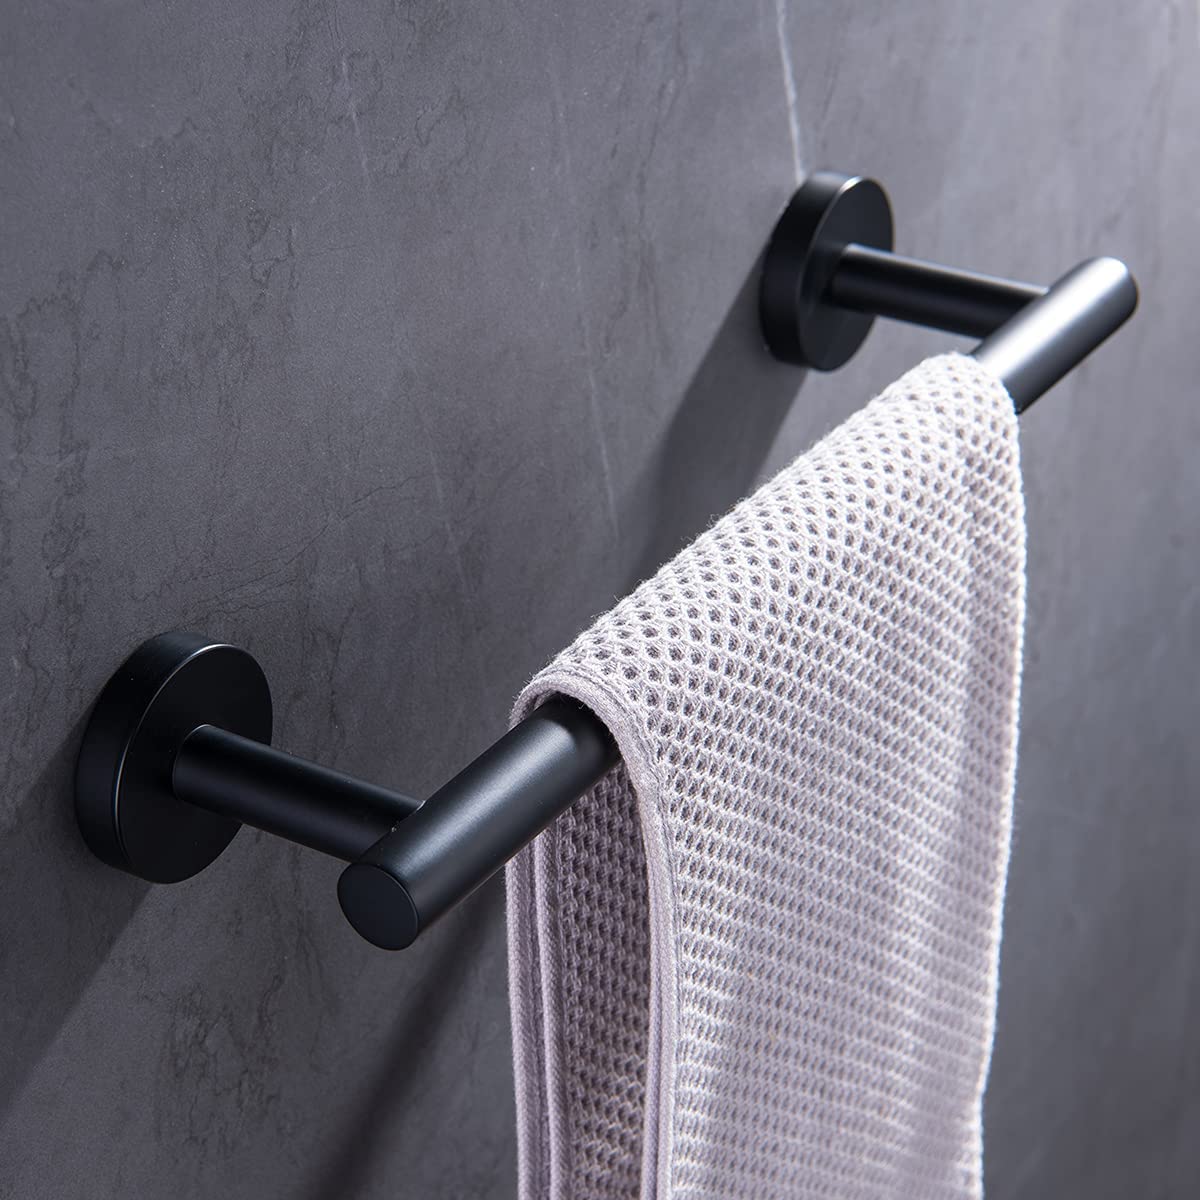 12 Inches Hand Towel Bar Stainless Steel Bathroom Towel Bar Holder Single Towel Rail Kitchen Dish Cloth Hanger - WELQUEEN